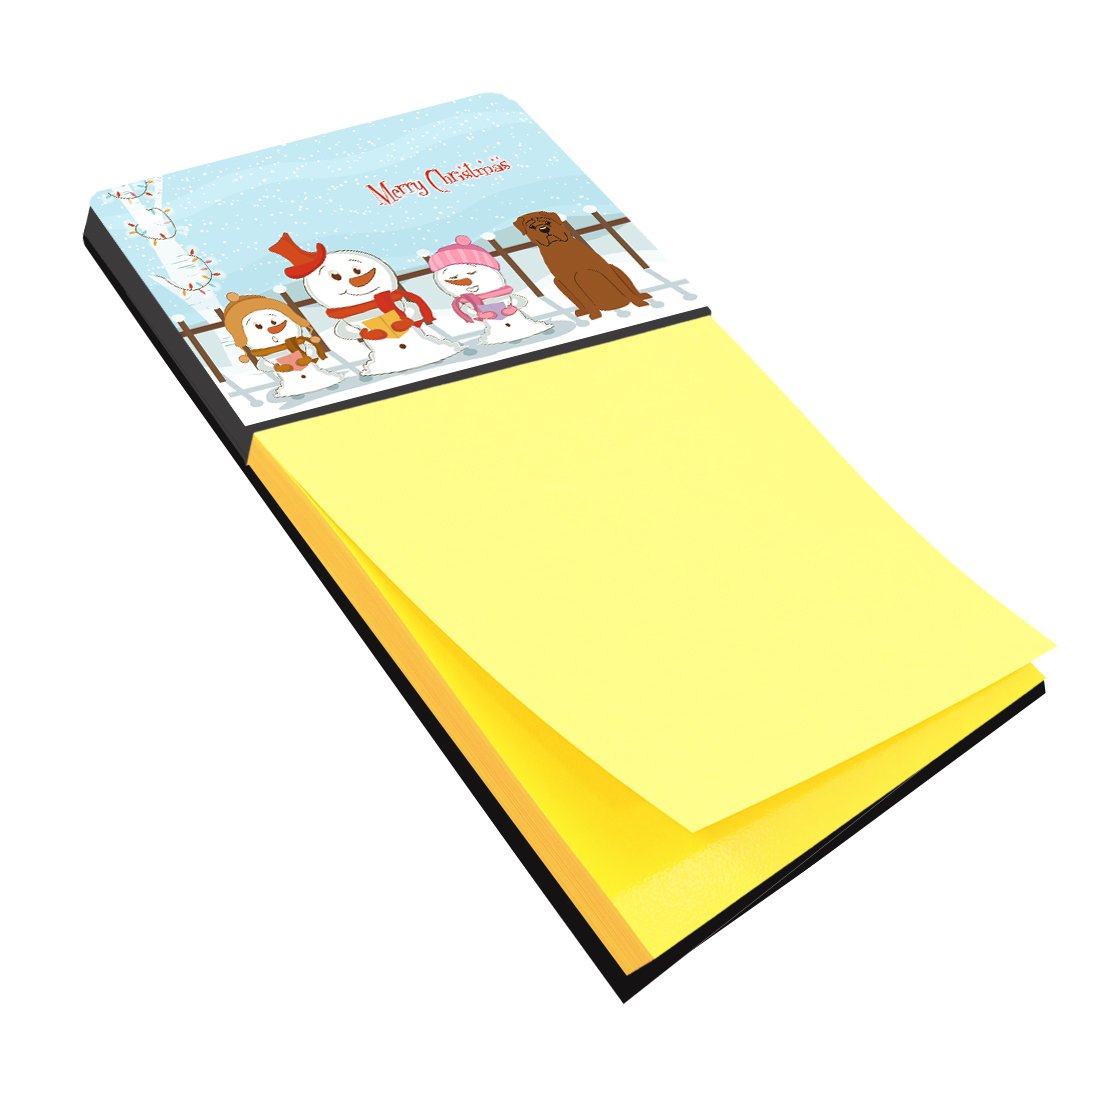 Merry Christmas Carolers Dogue de Bourdeaux Sticky Note Holder BB2404SN by Caroline's Treasures